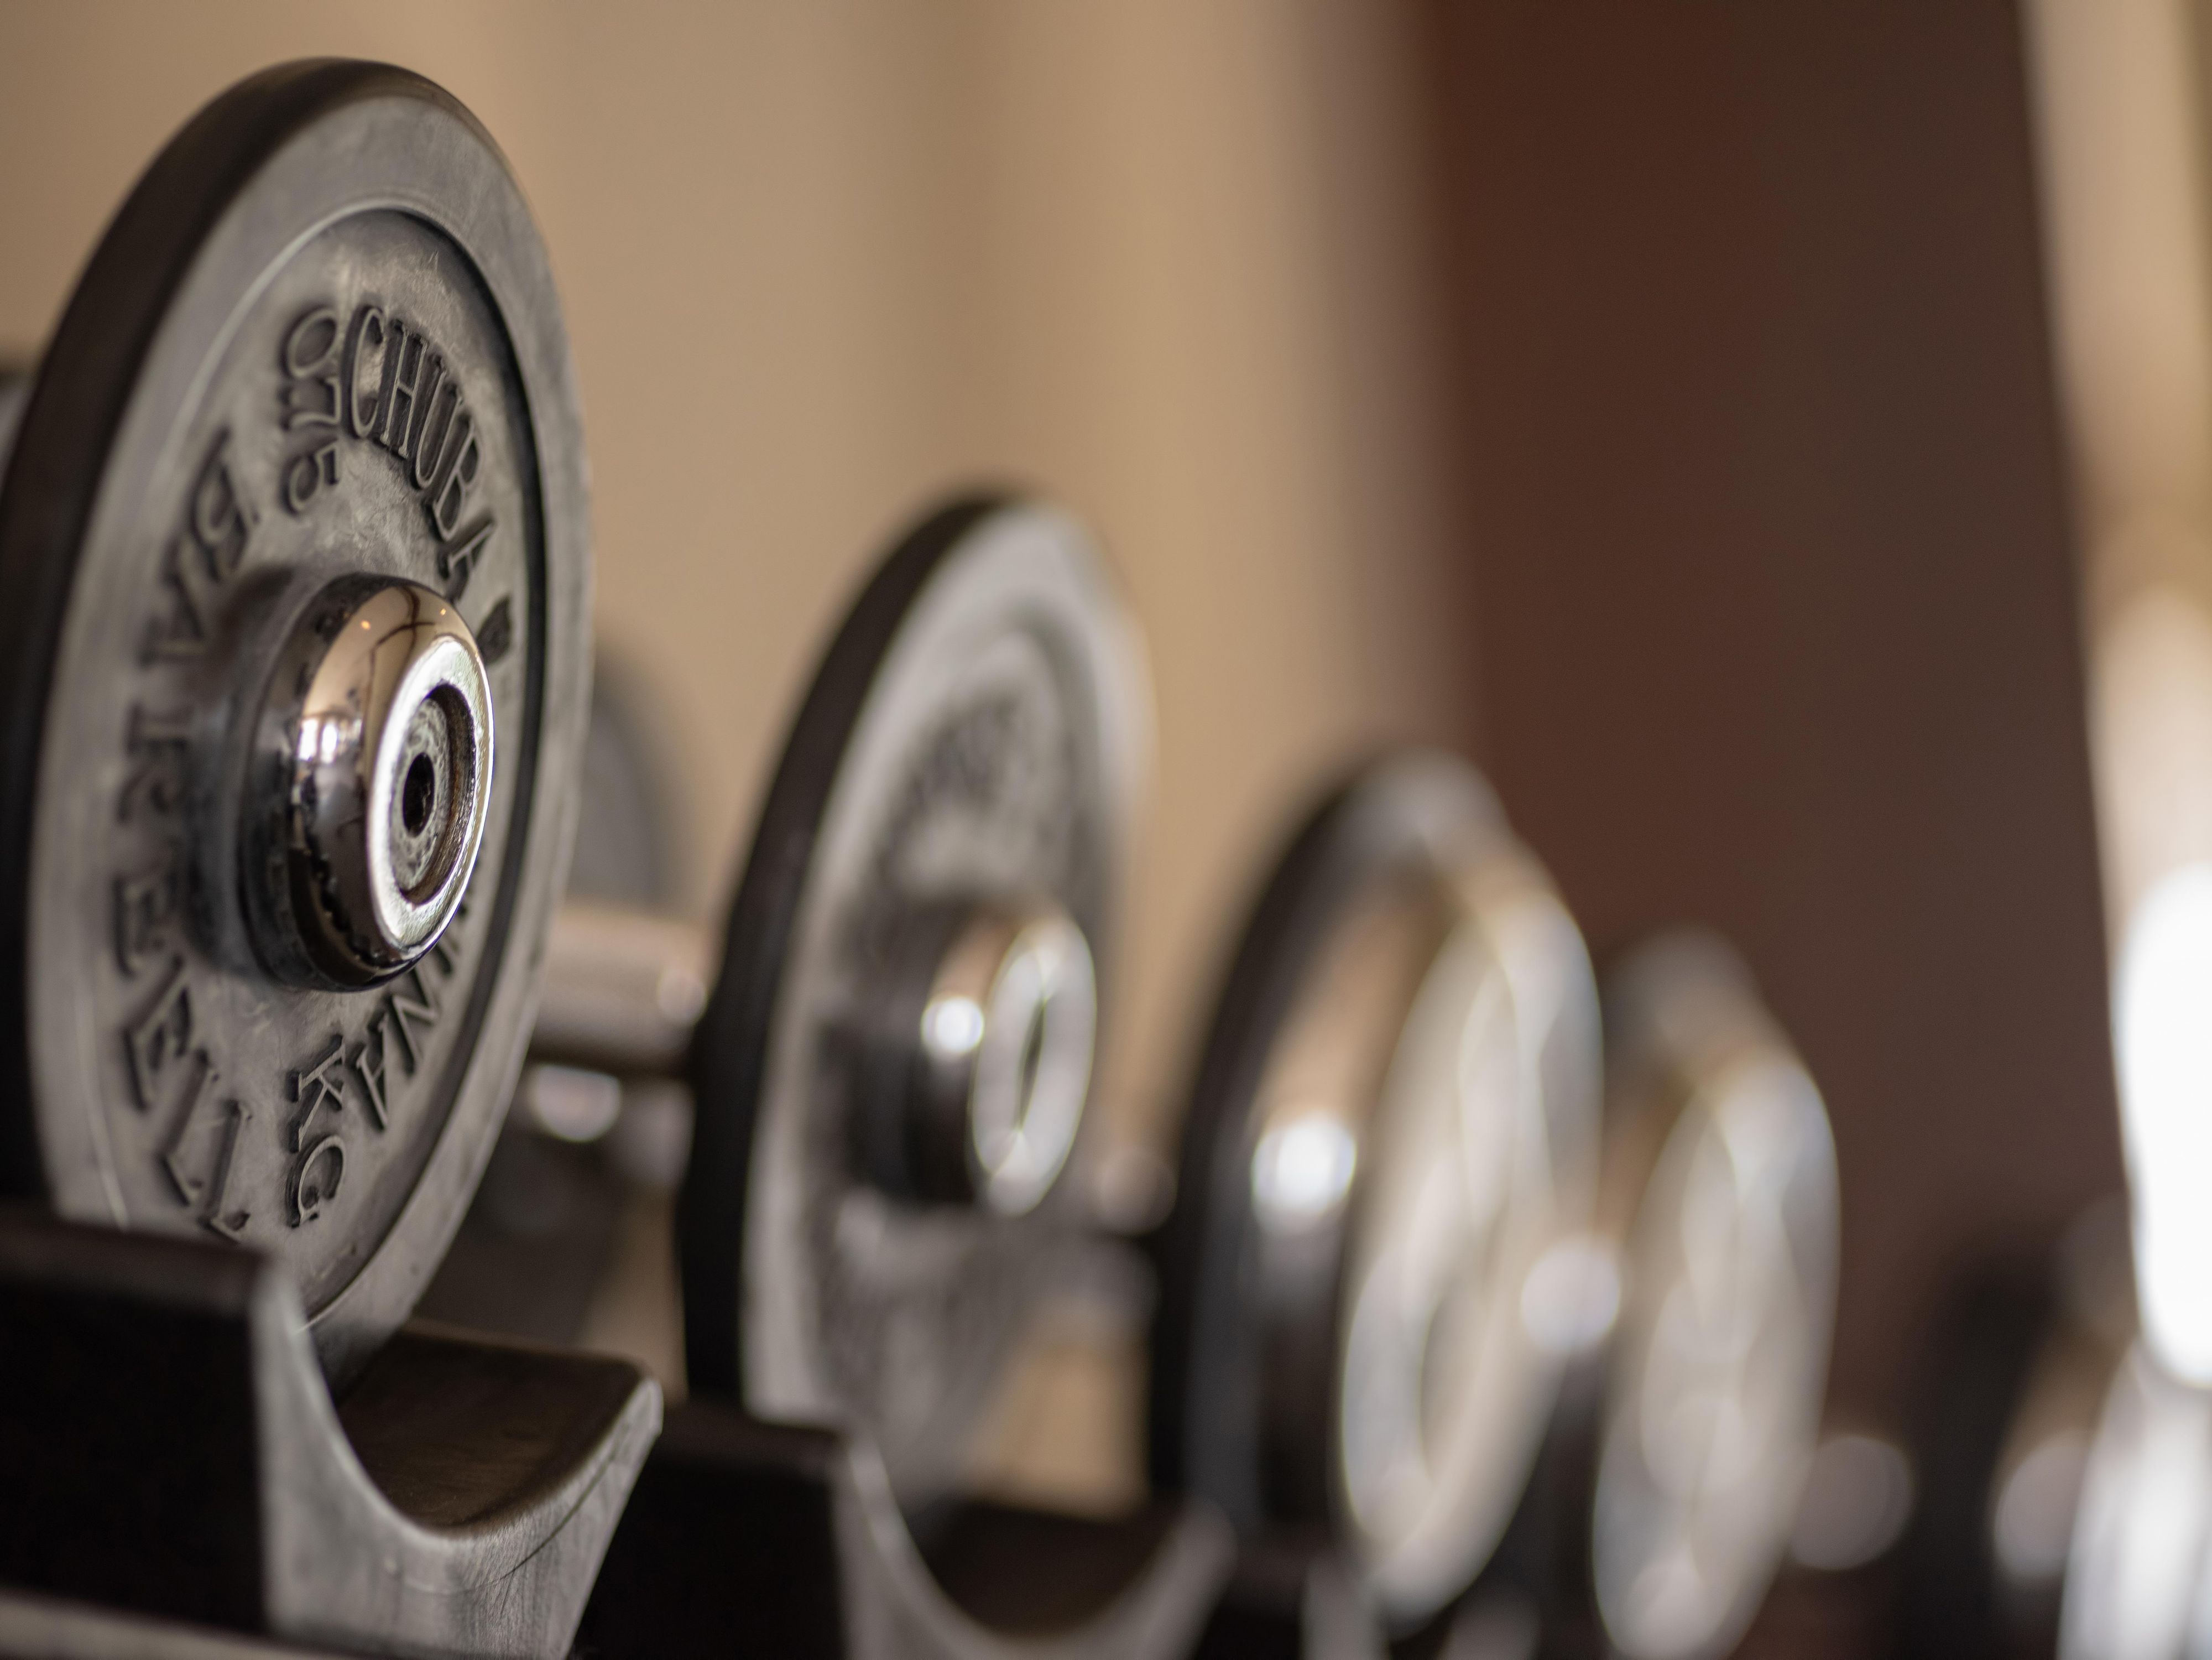 Keep up with your fitness goals in our well-equipped gym all year long.
